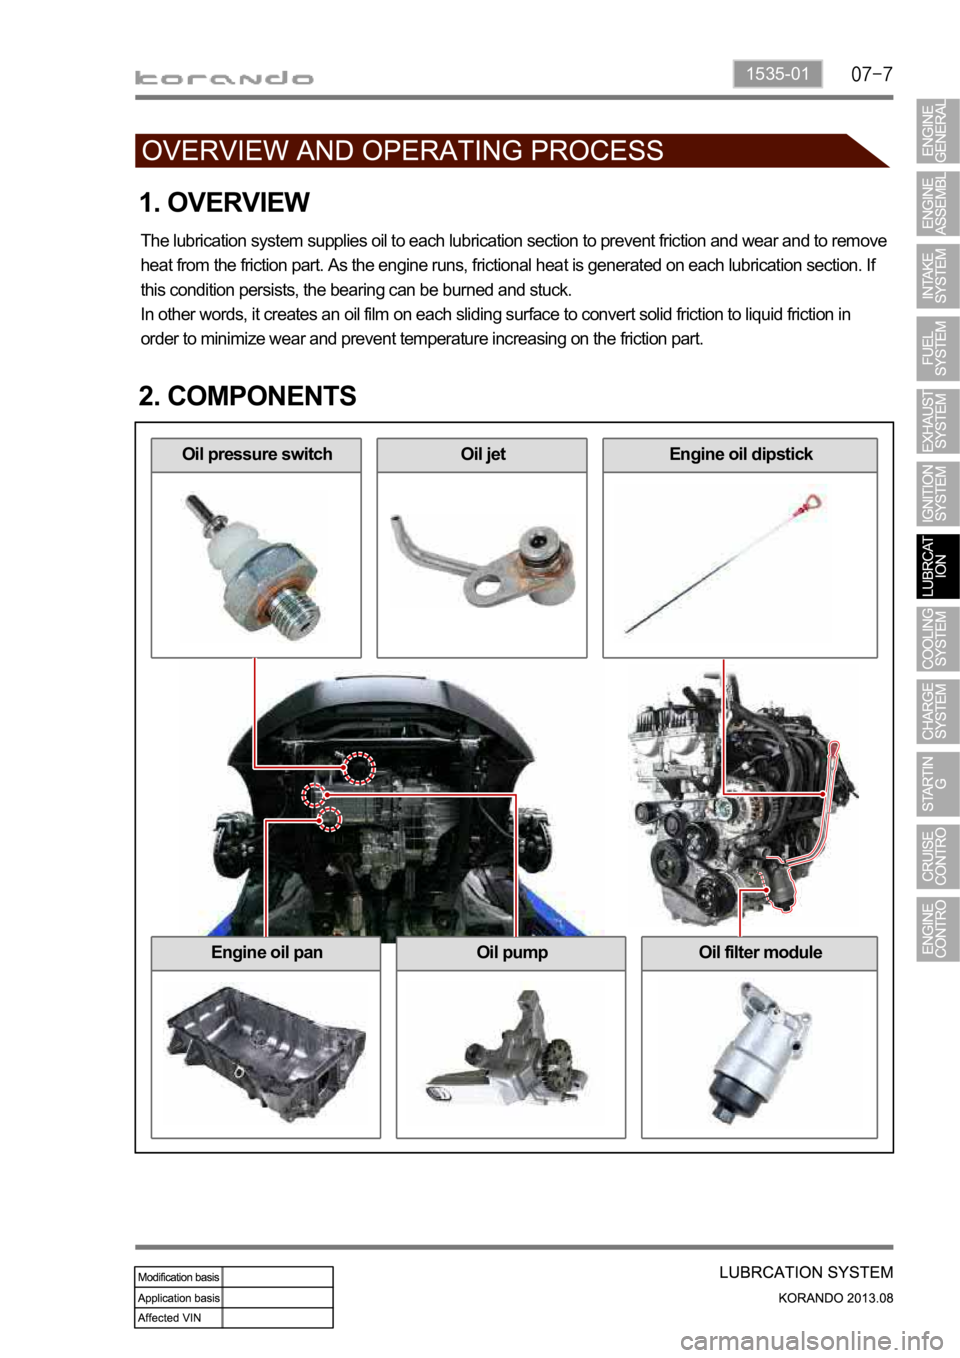 SSANGYONG KORANDO 2013 Workshop Manual 1535-01
Oil pressure switch
1. OVERVIEW
The lubrication system supplies oil to each lubrication section to prevent friction and wear and to remove 
heat from the friction part. As the engine runs, fri